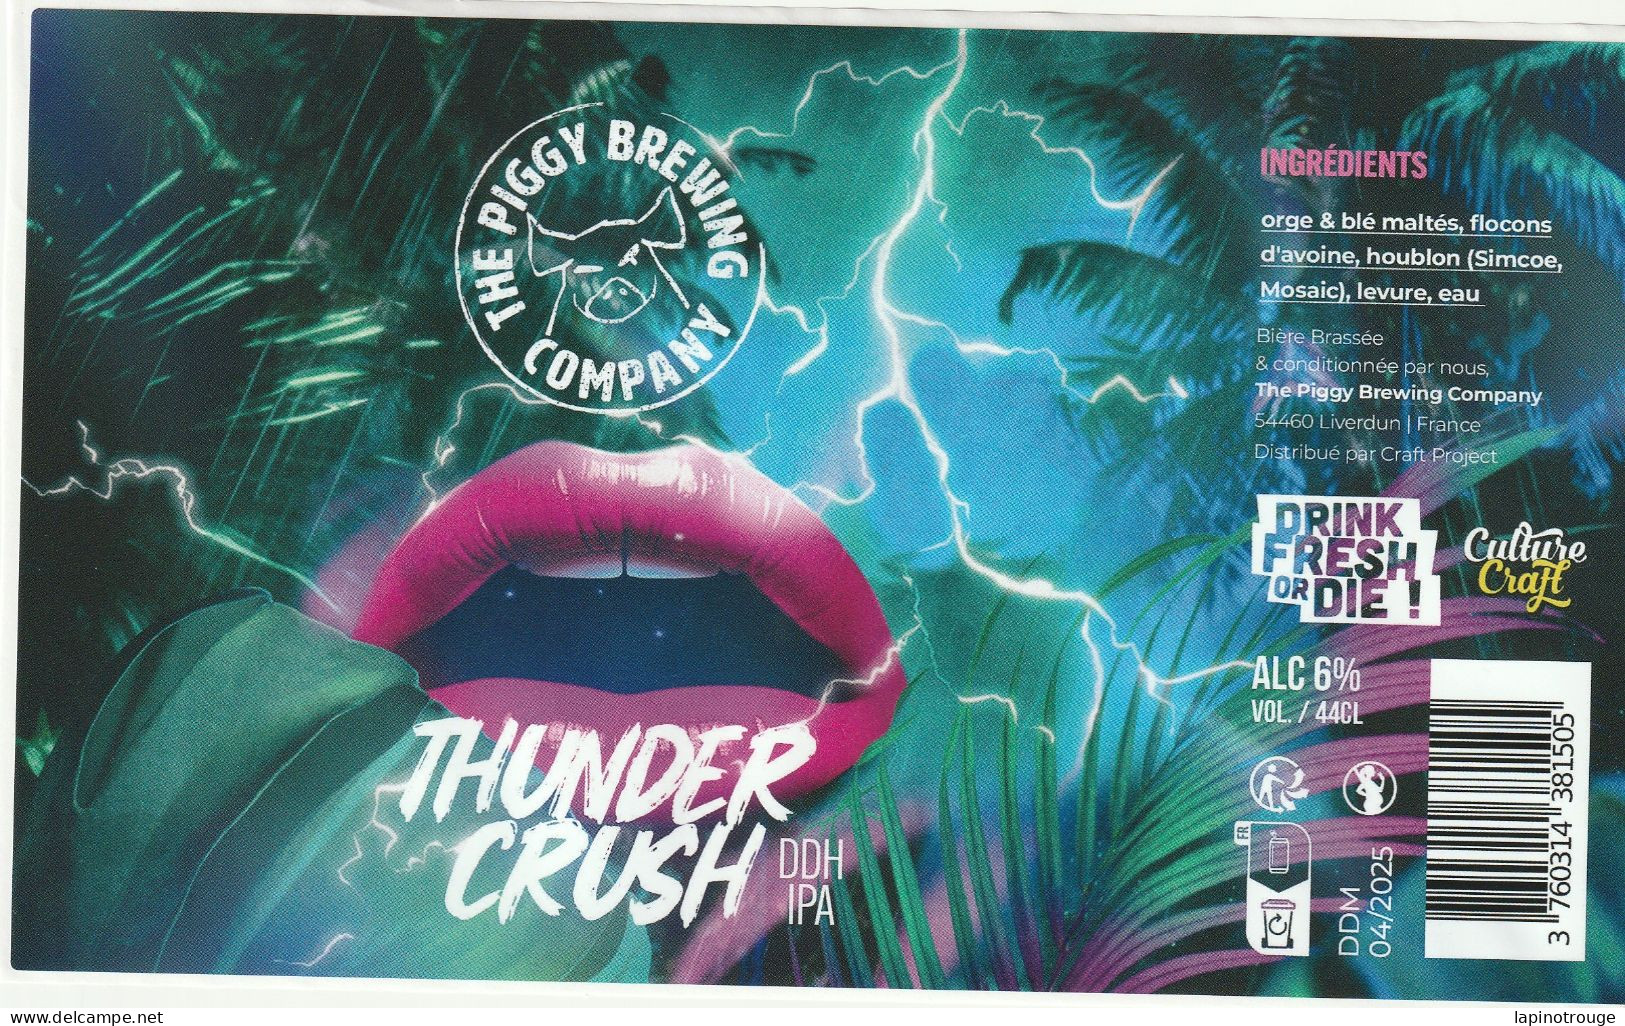 Etiquette Bière The Peggy Brew Compagny Thunder Crush DDH IPA - Dishes